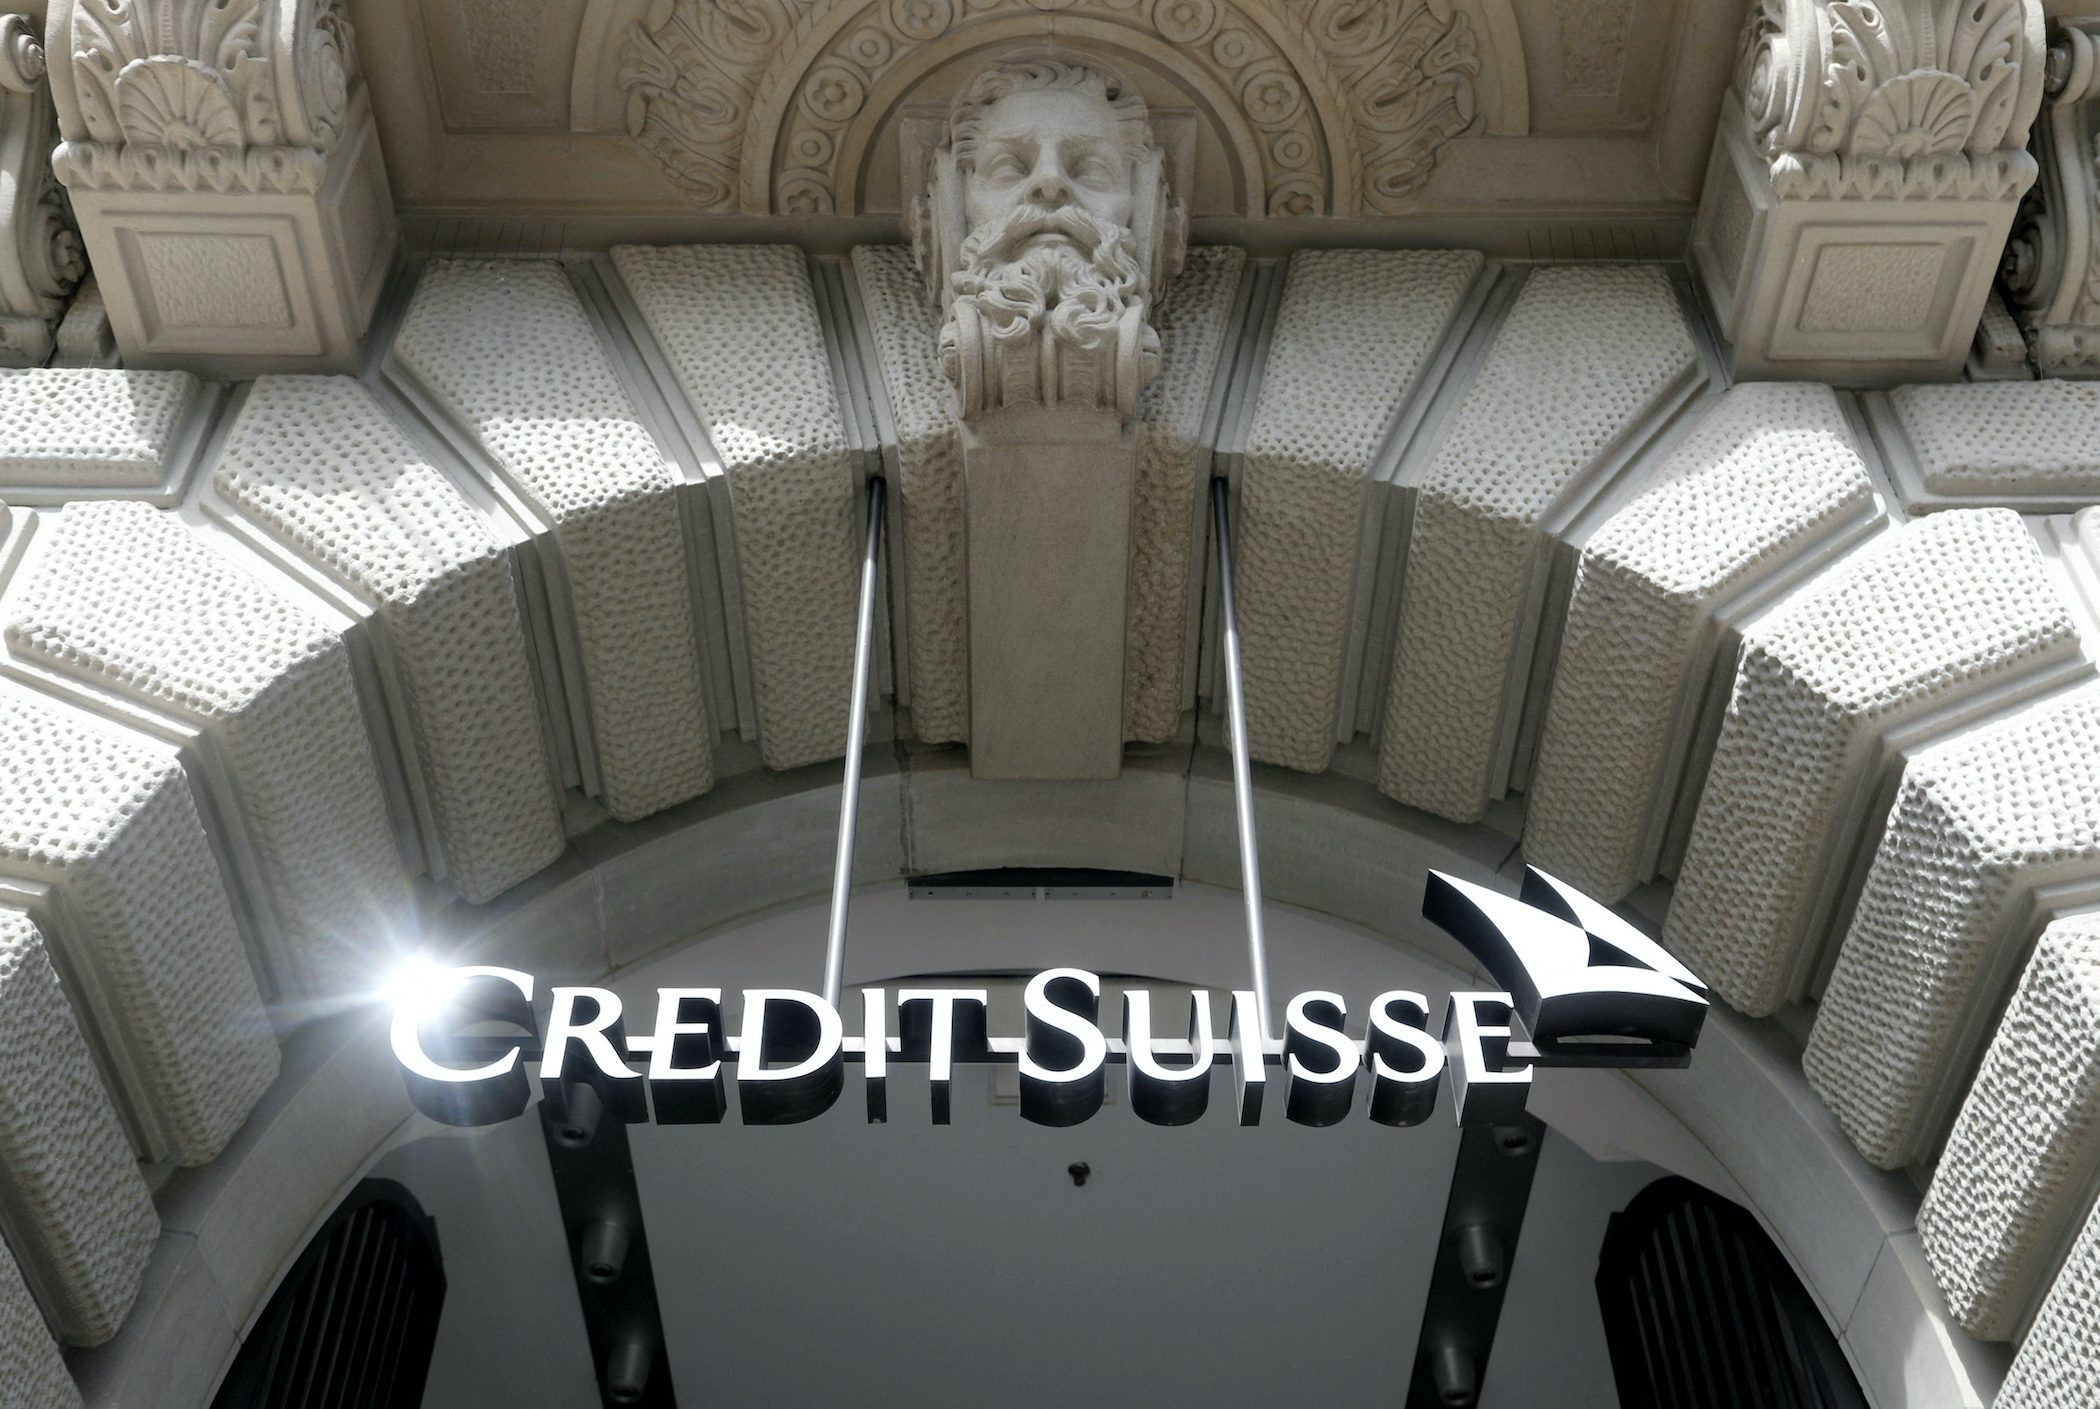 US jury finds Credit Suisse did not rig forex market